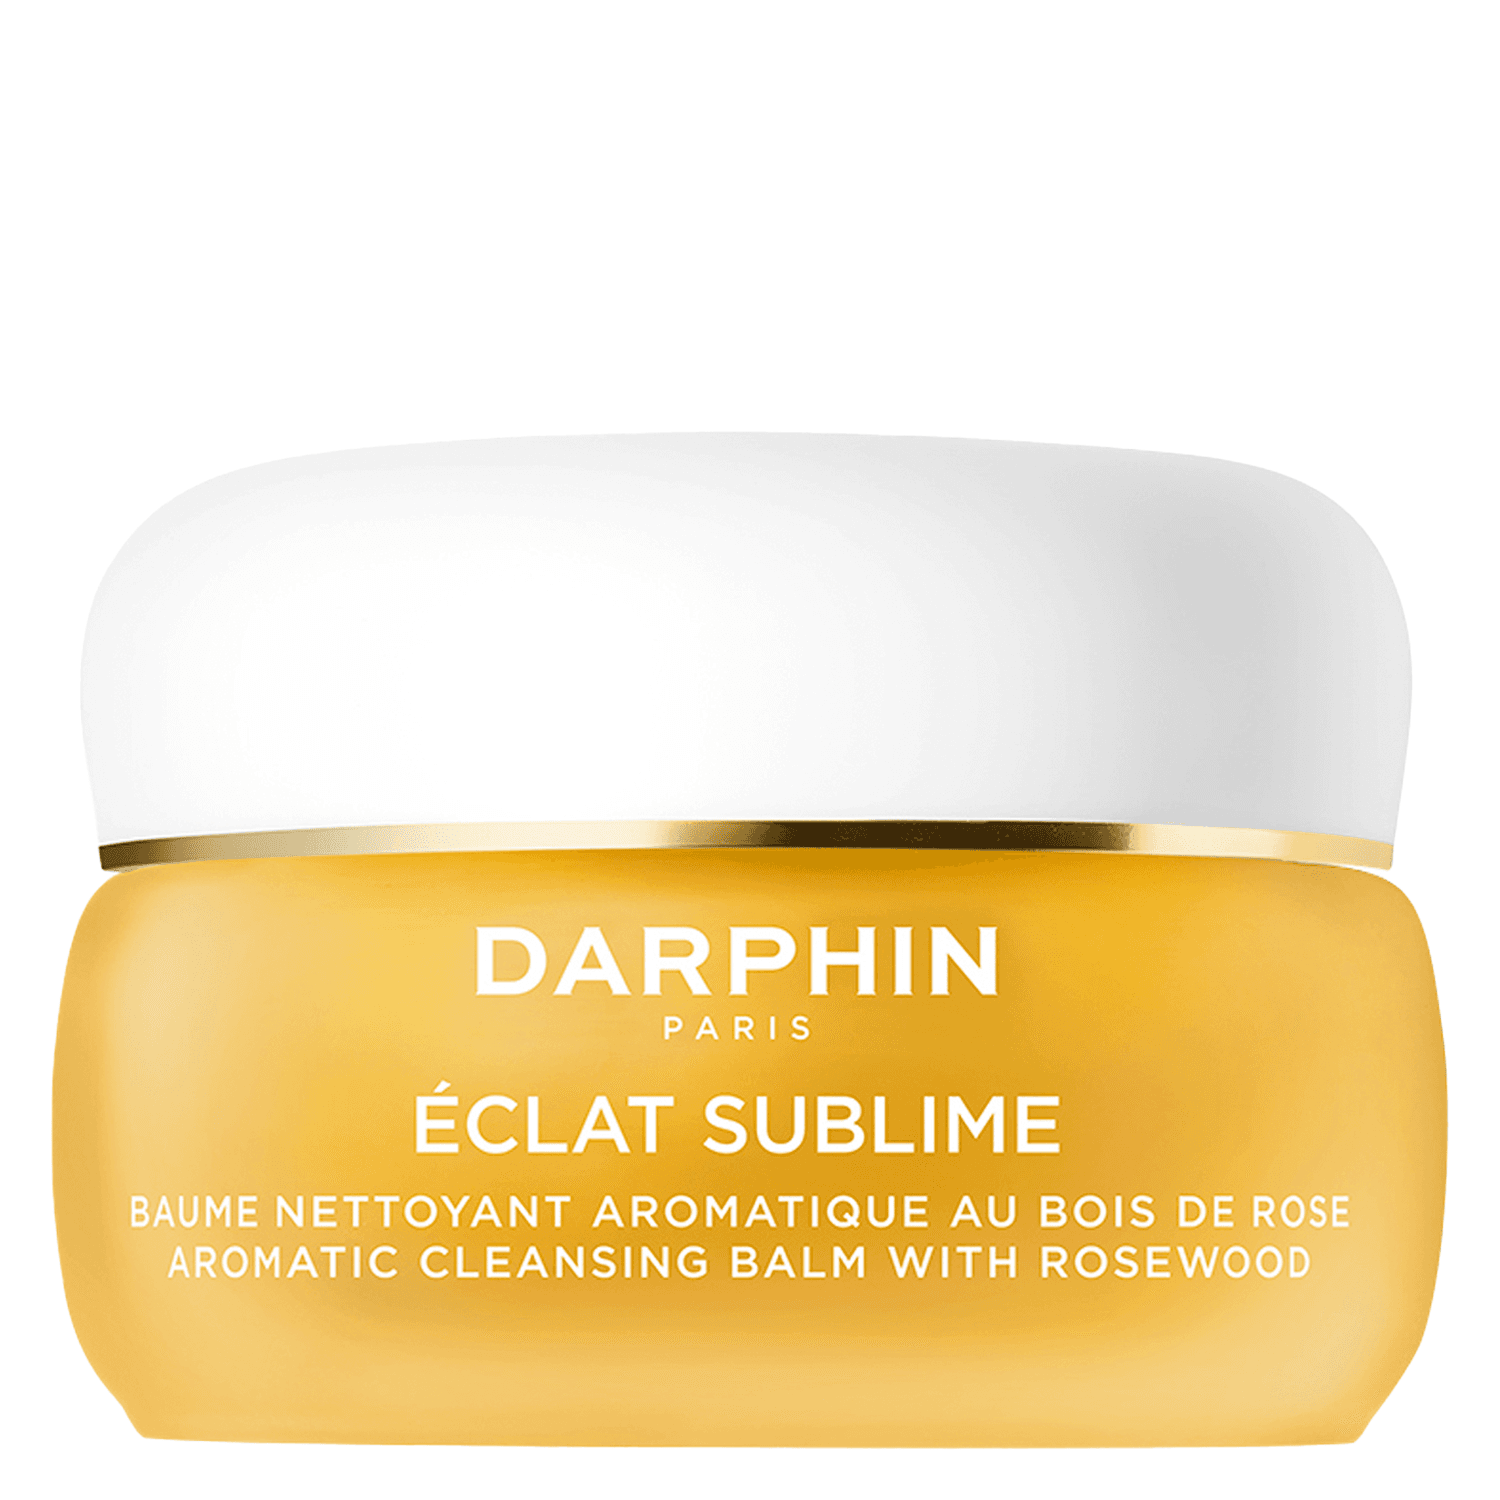 DARPHIN CARE - Éclat Sublime Aromatic Cleansing Balm